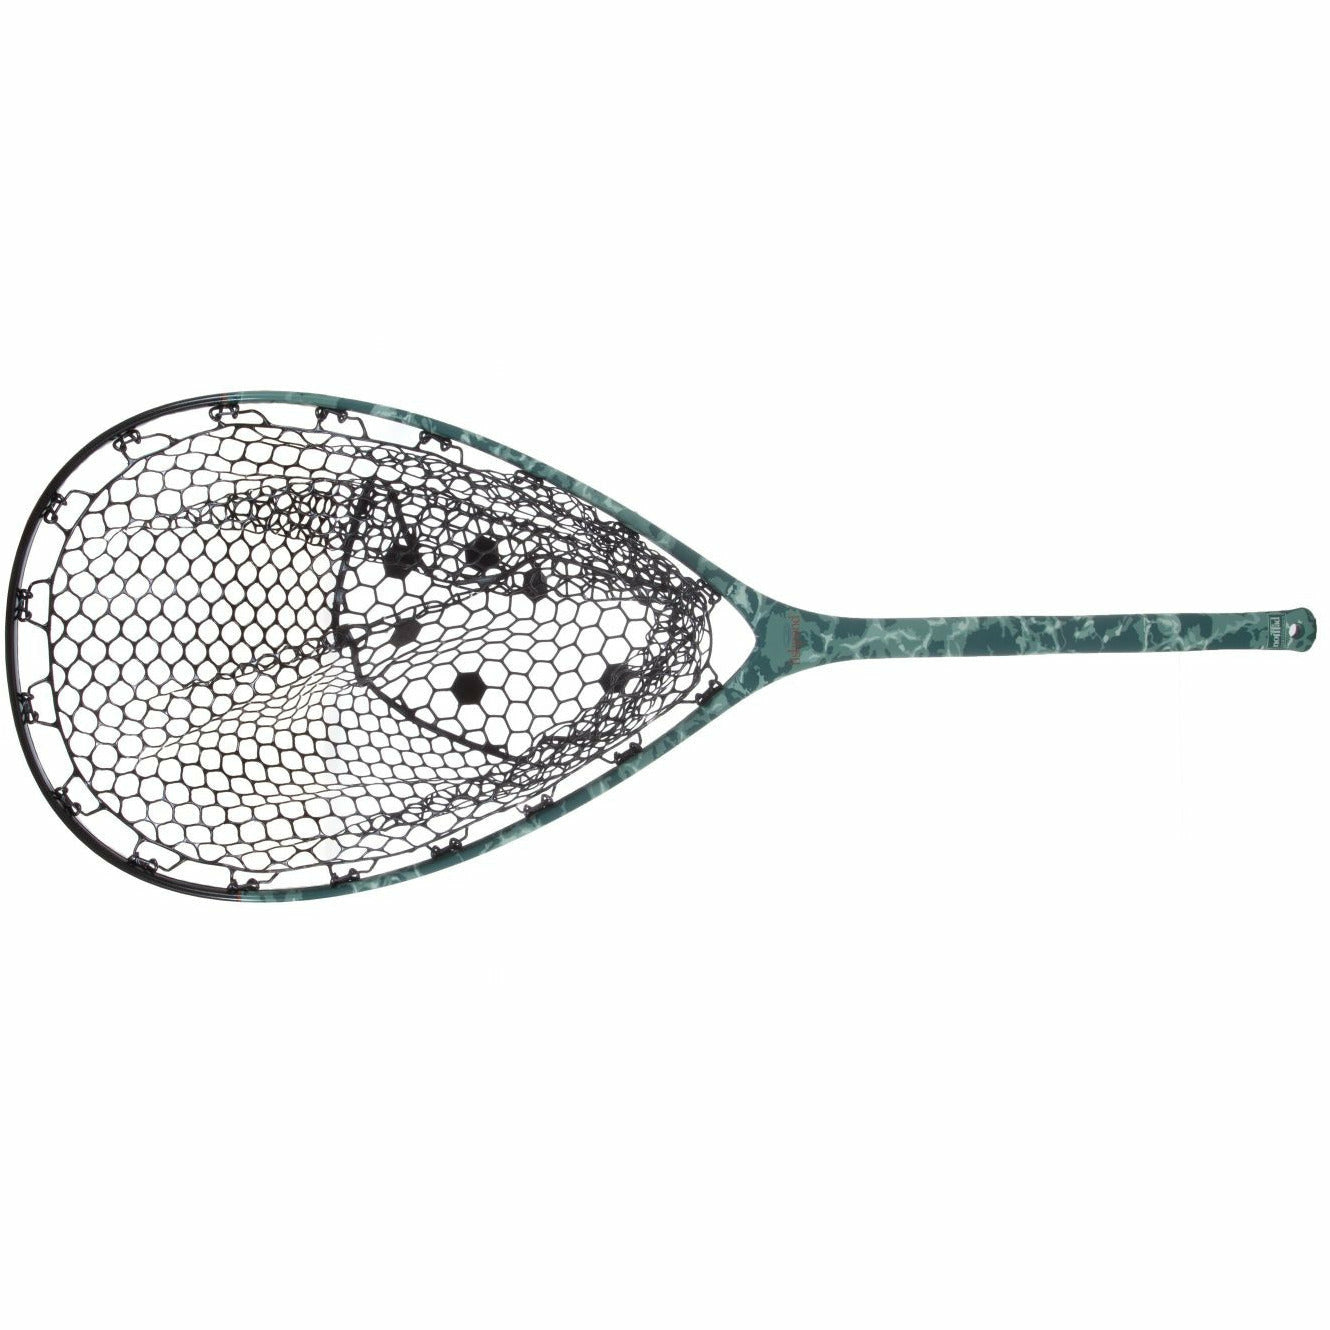 Fishpond Nomad Mid-Length Boat Net - Salty Camo - 239 Flies